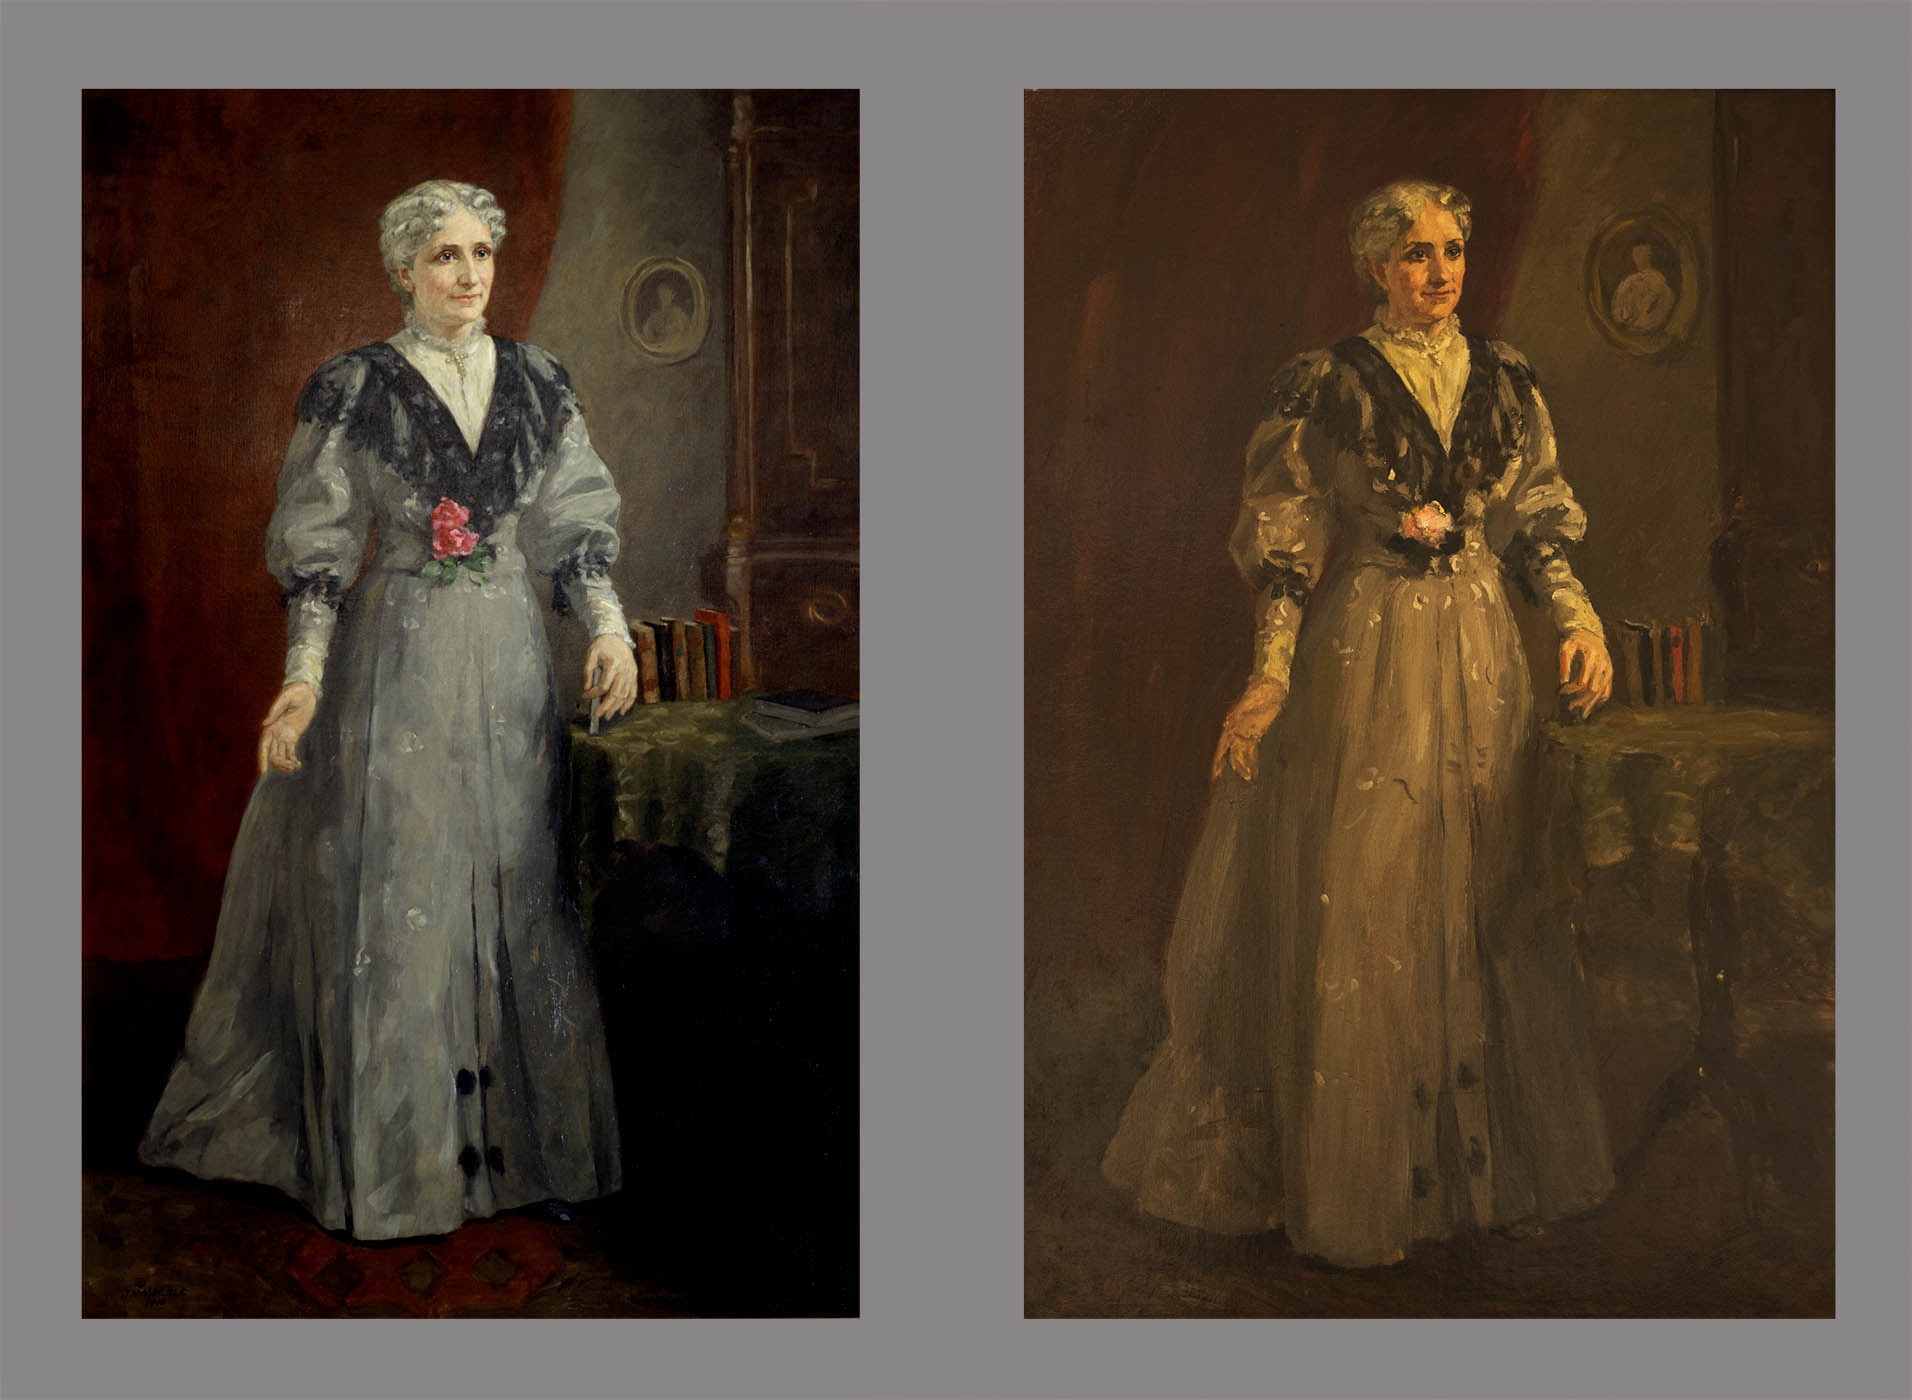 Compare the two paintings